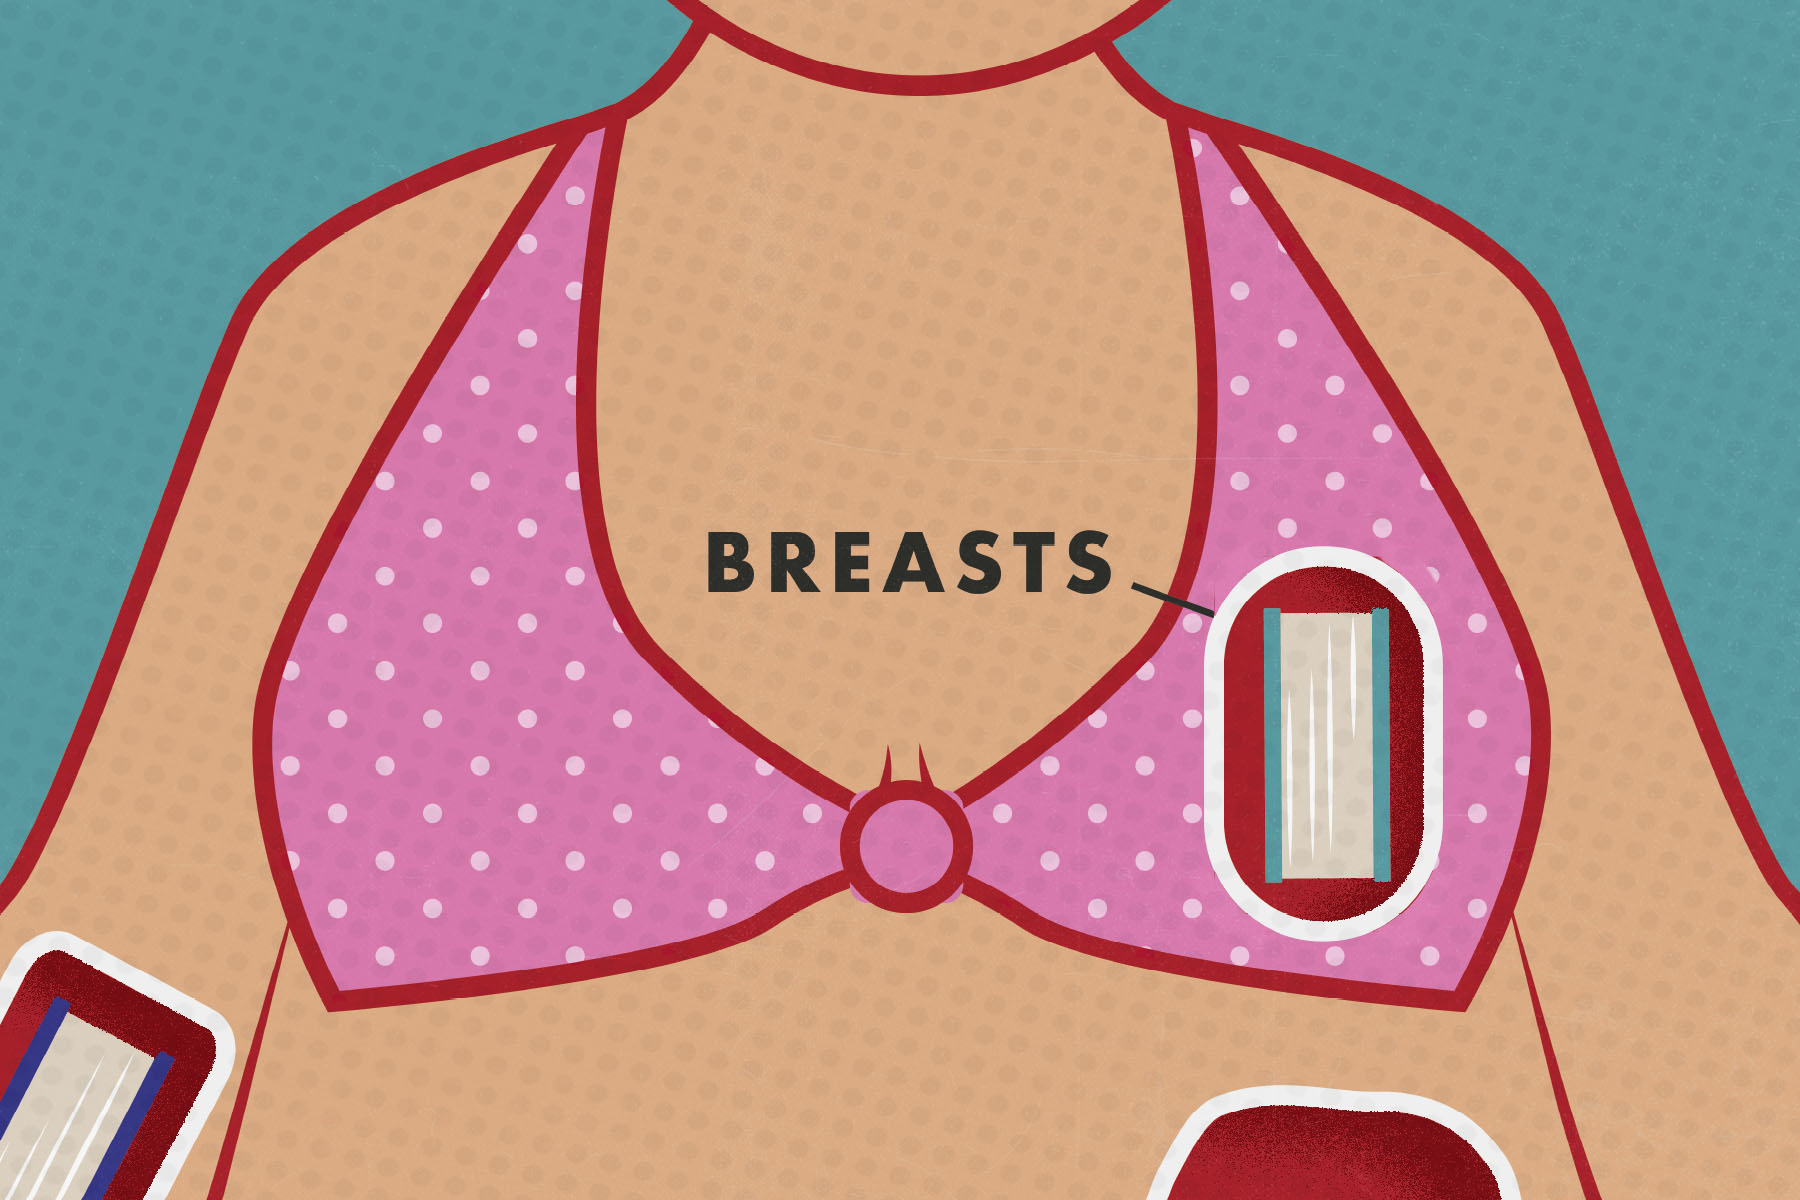 A boardgame-style illustration of breasts